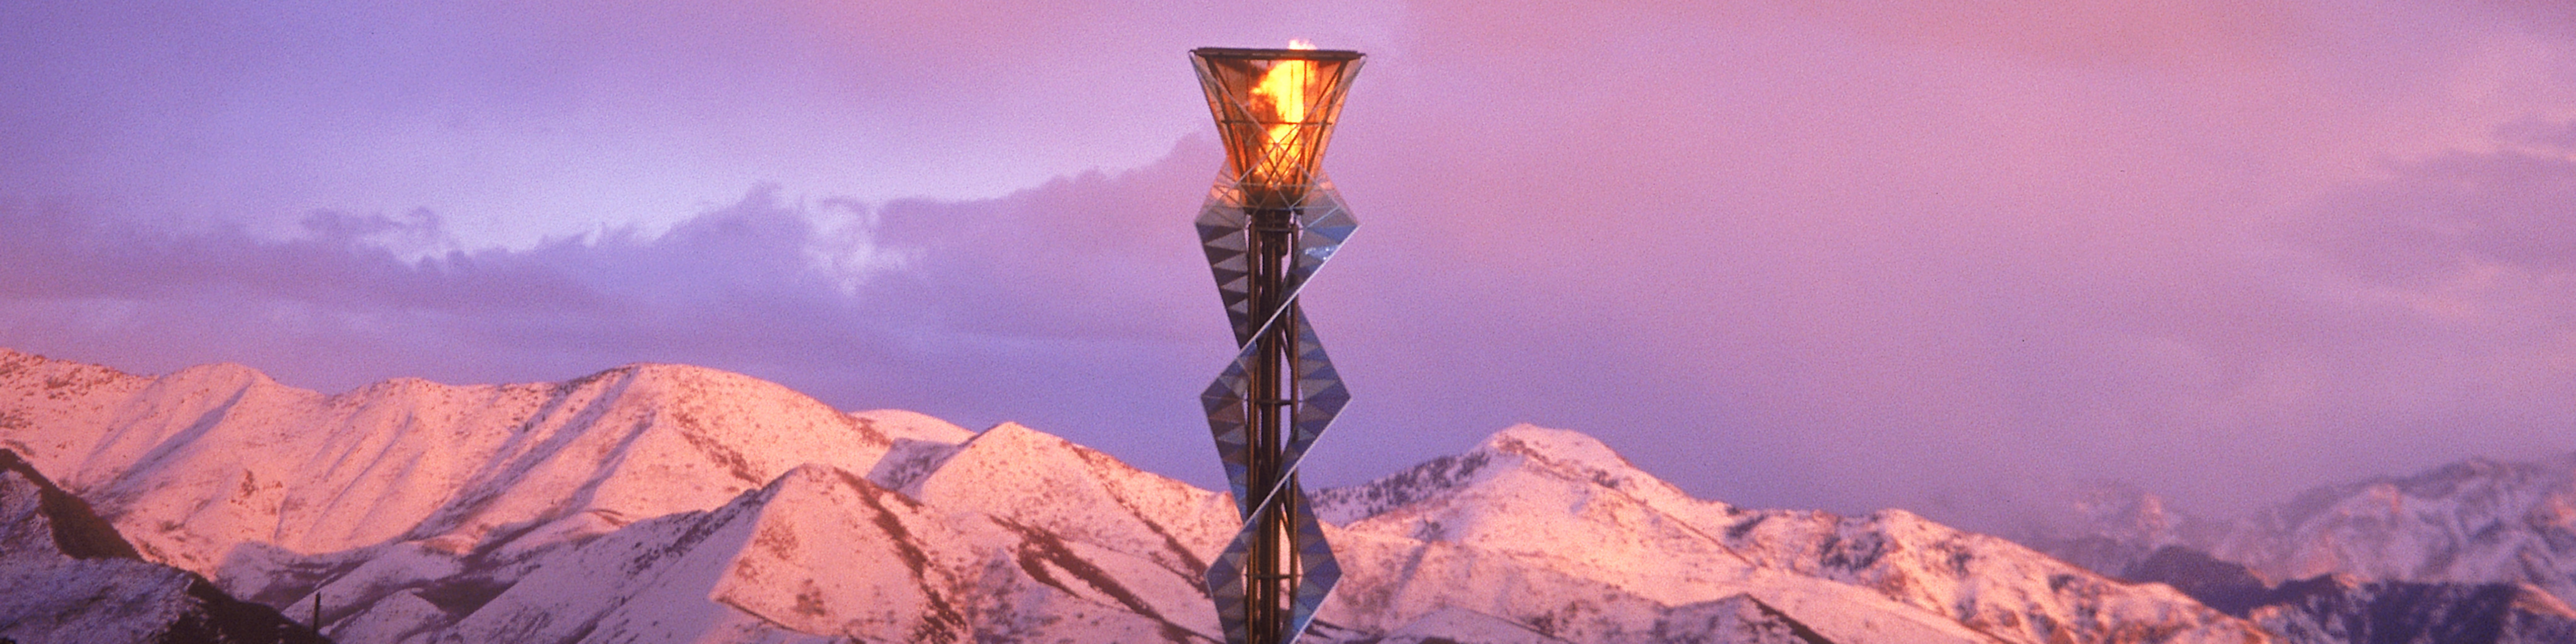 The Olympic Cauldron before the Closing Ceremony of the Salt Lake City Winter Olympic Games at the Rice-Eccles Stadium in Salt Lake City, Utah.